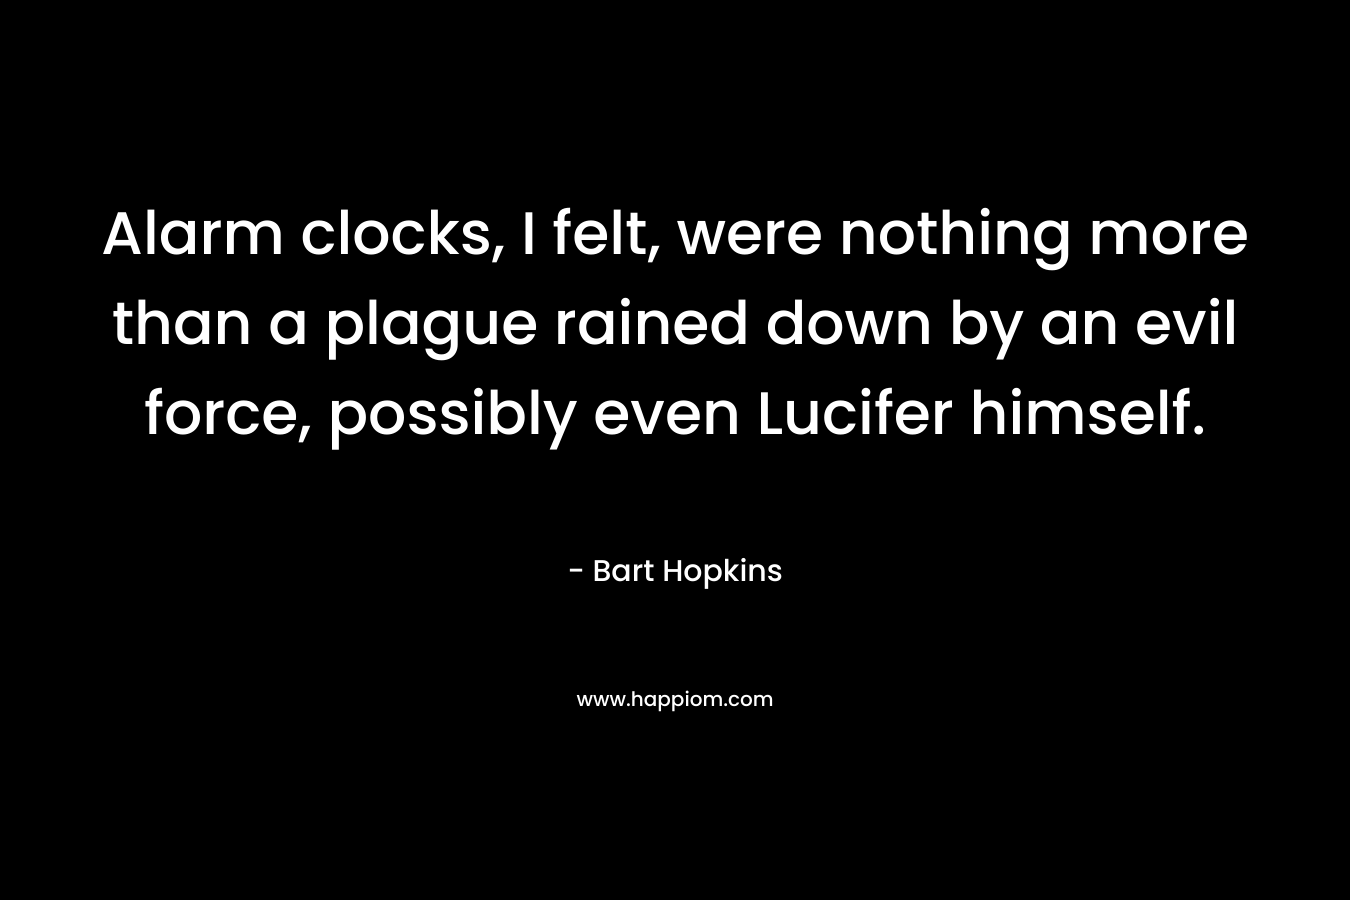 Alarm clocks, I felt, were nothing more than a plague rained down by an evil force, possibly even Lucifer himself. – Bart Hopkins